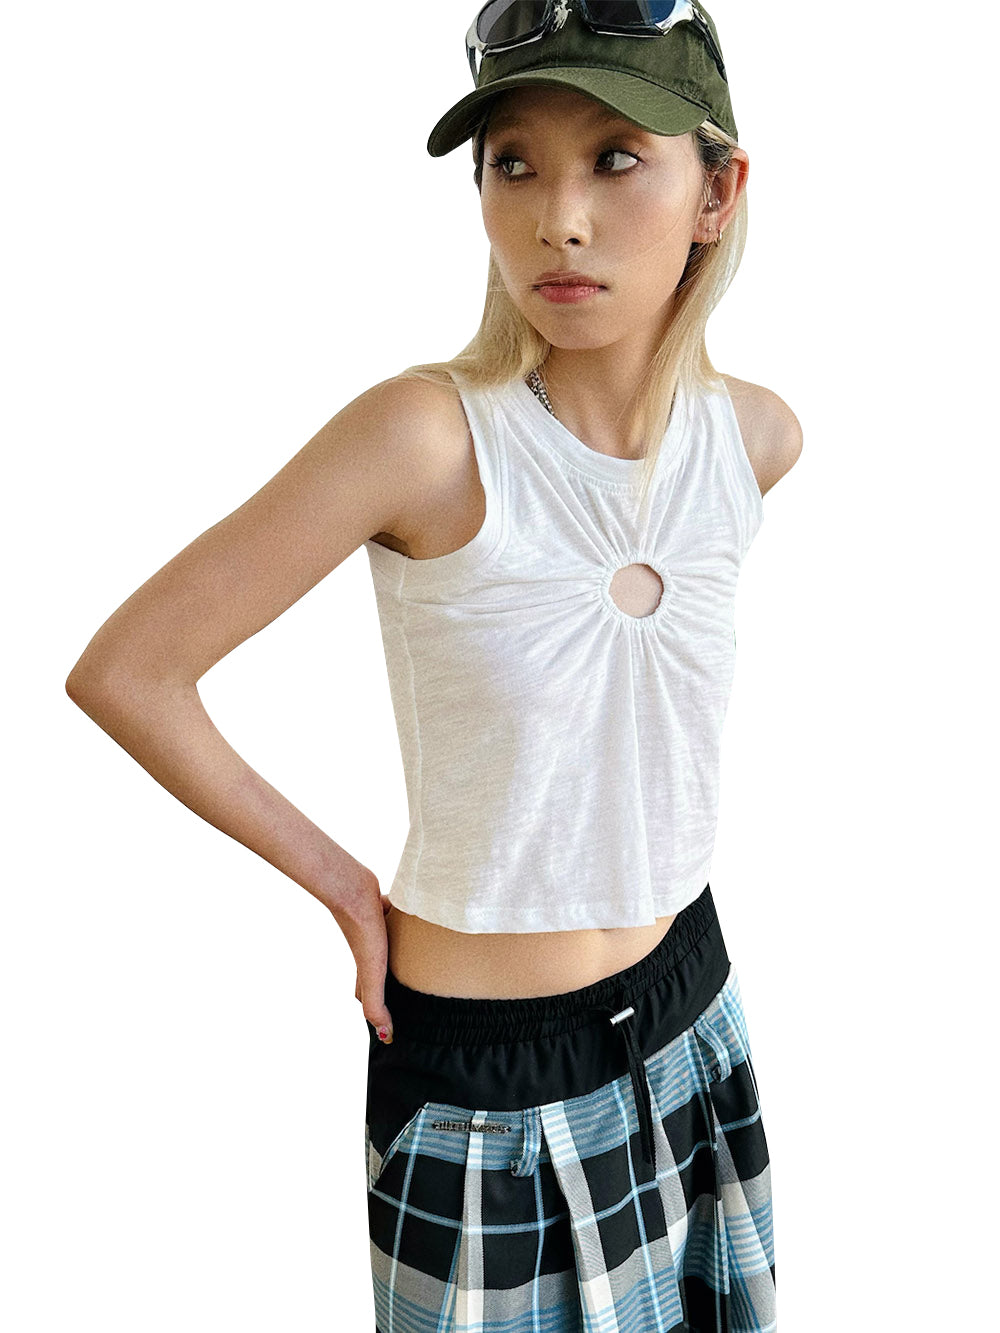 MUKTANK x  TWOPLUMGIRLS  Breathable Perforated Crinkle Cotton Cami for Summer